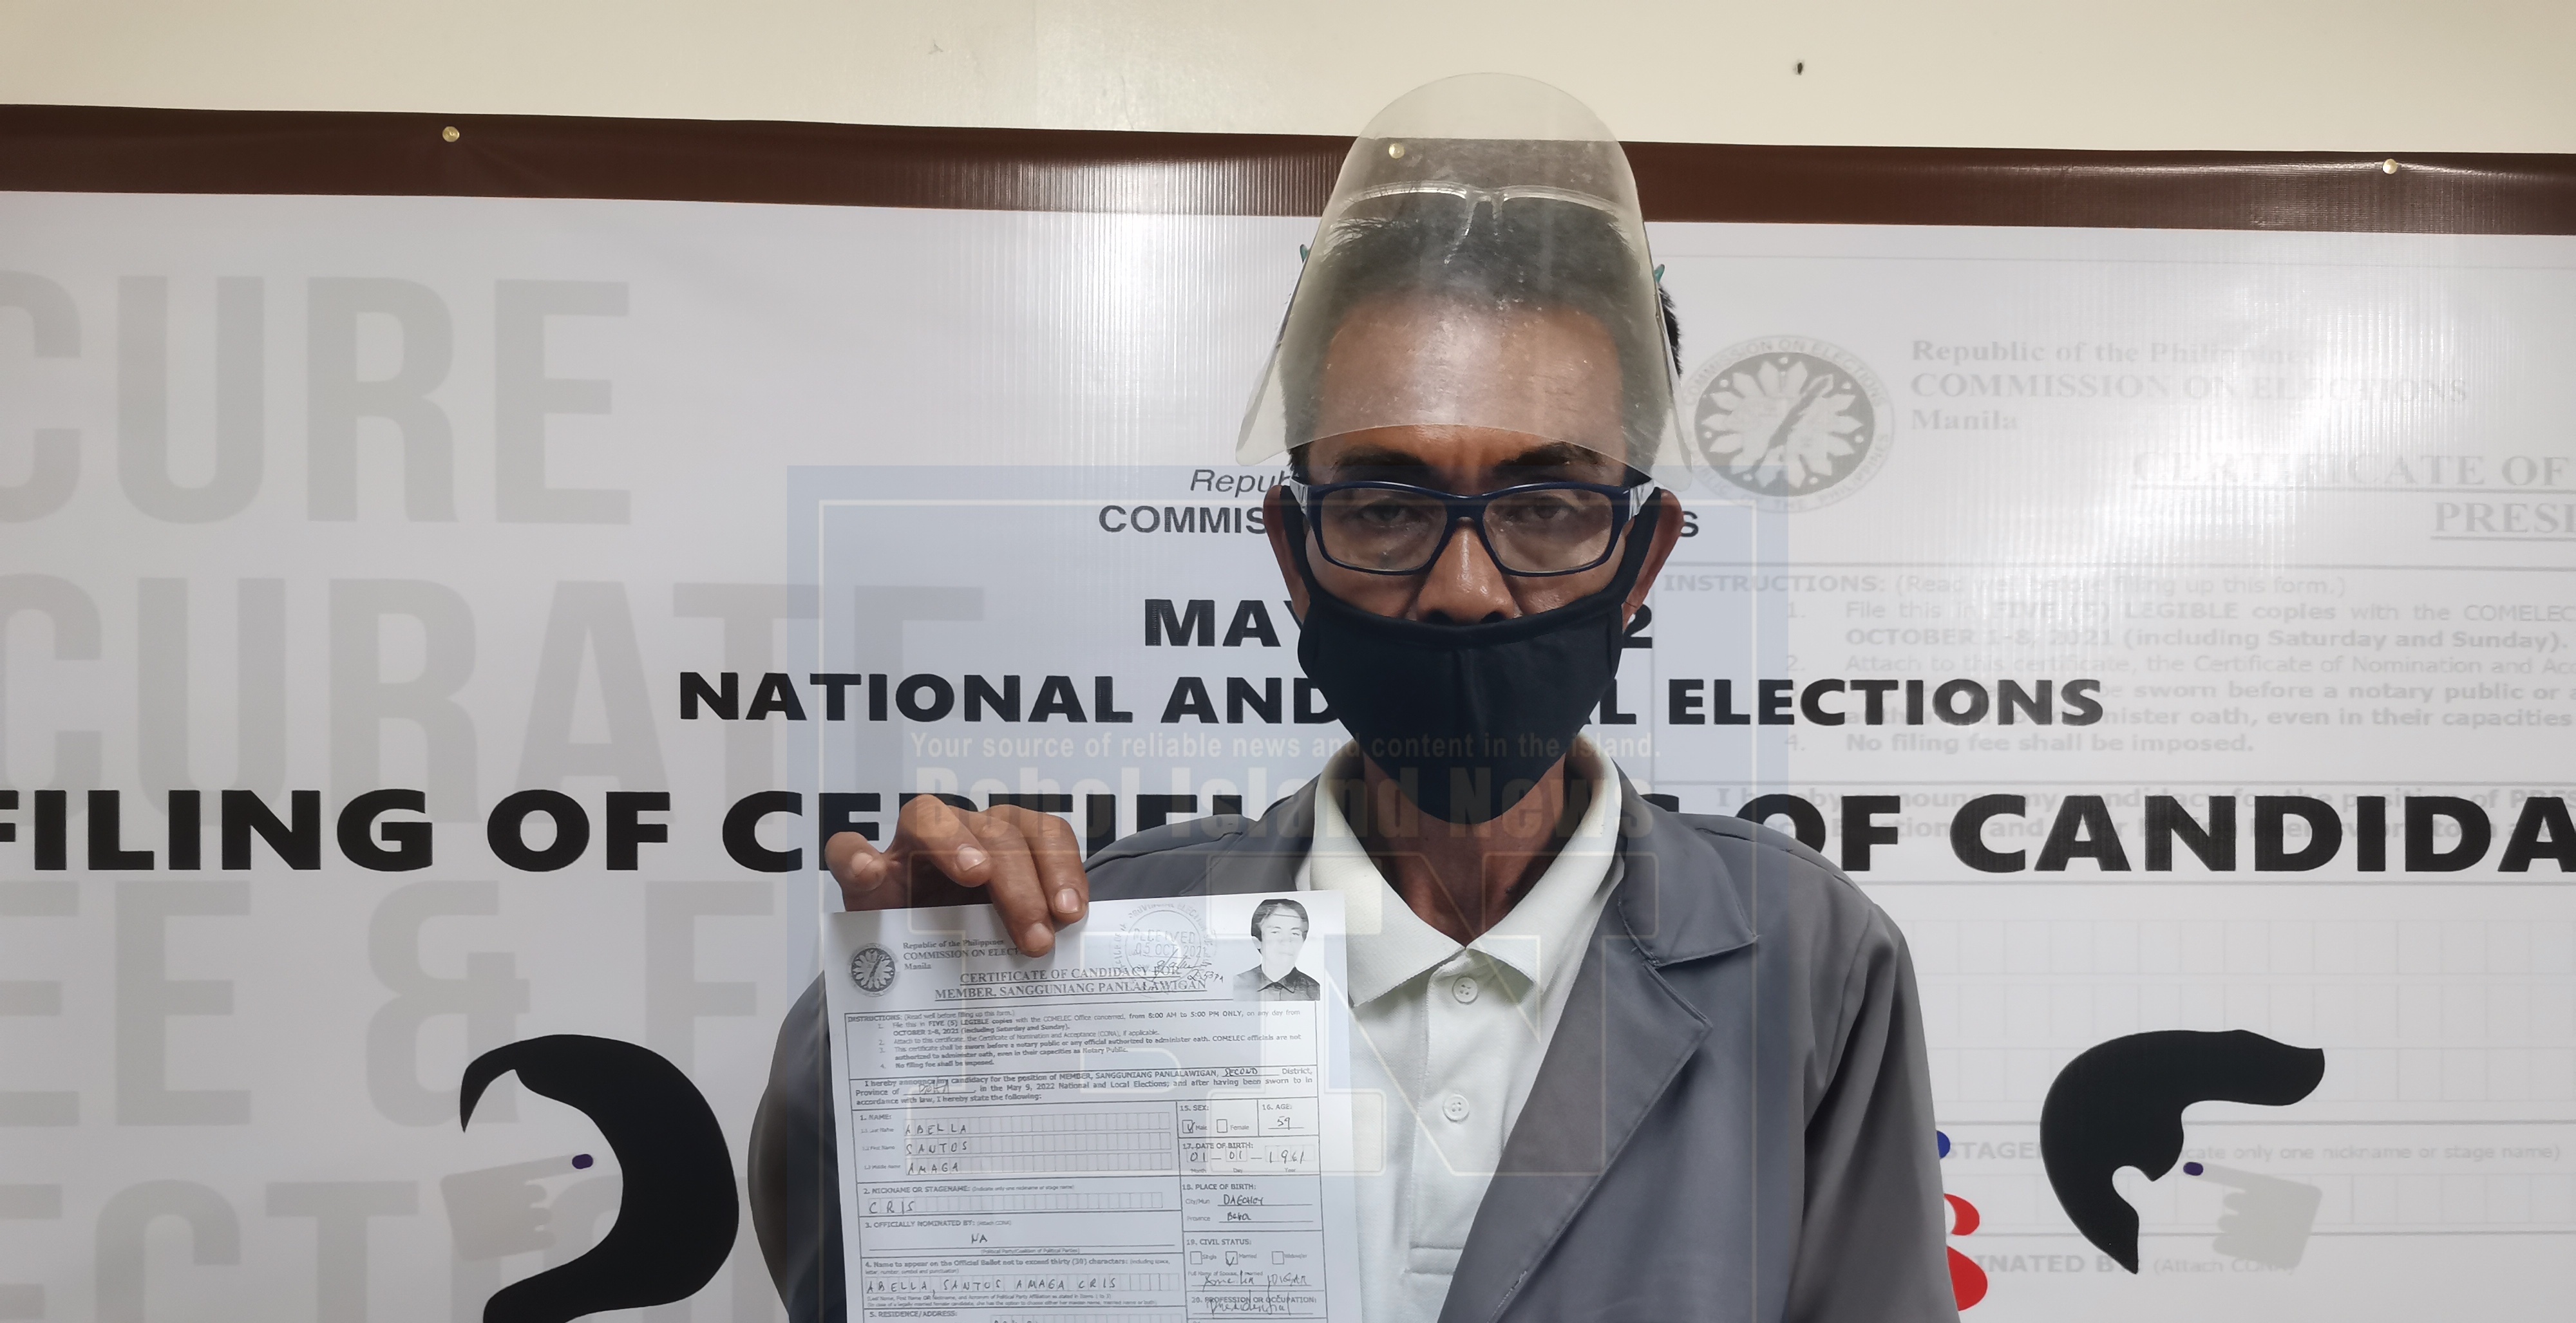 PINILIAY 2022: Farmer in formal suit files COC for provincial board